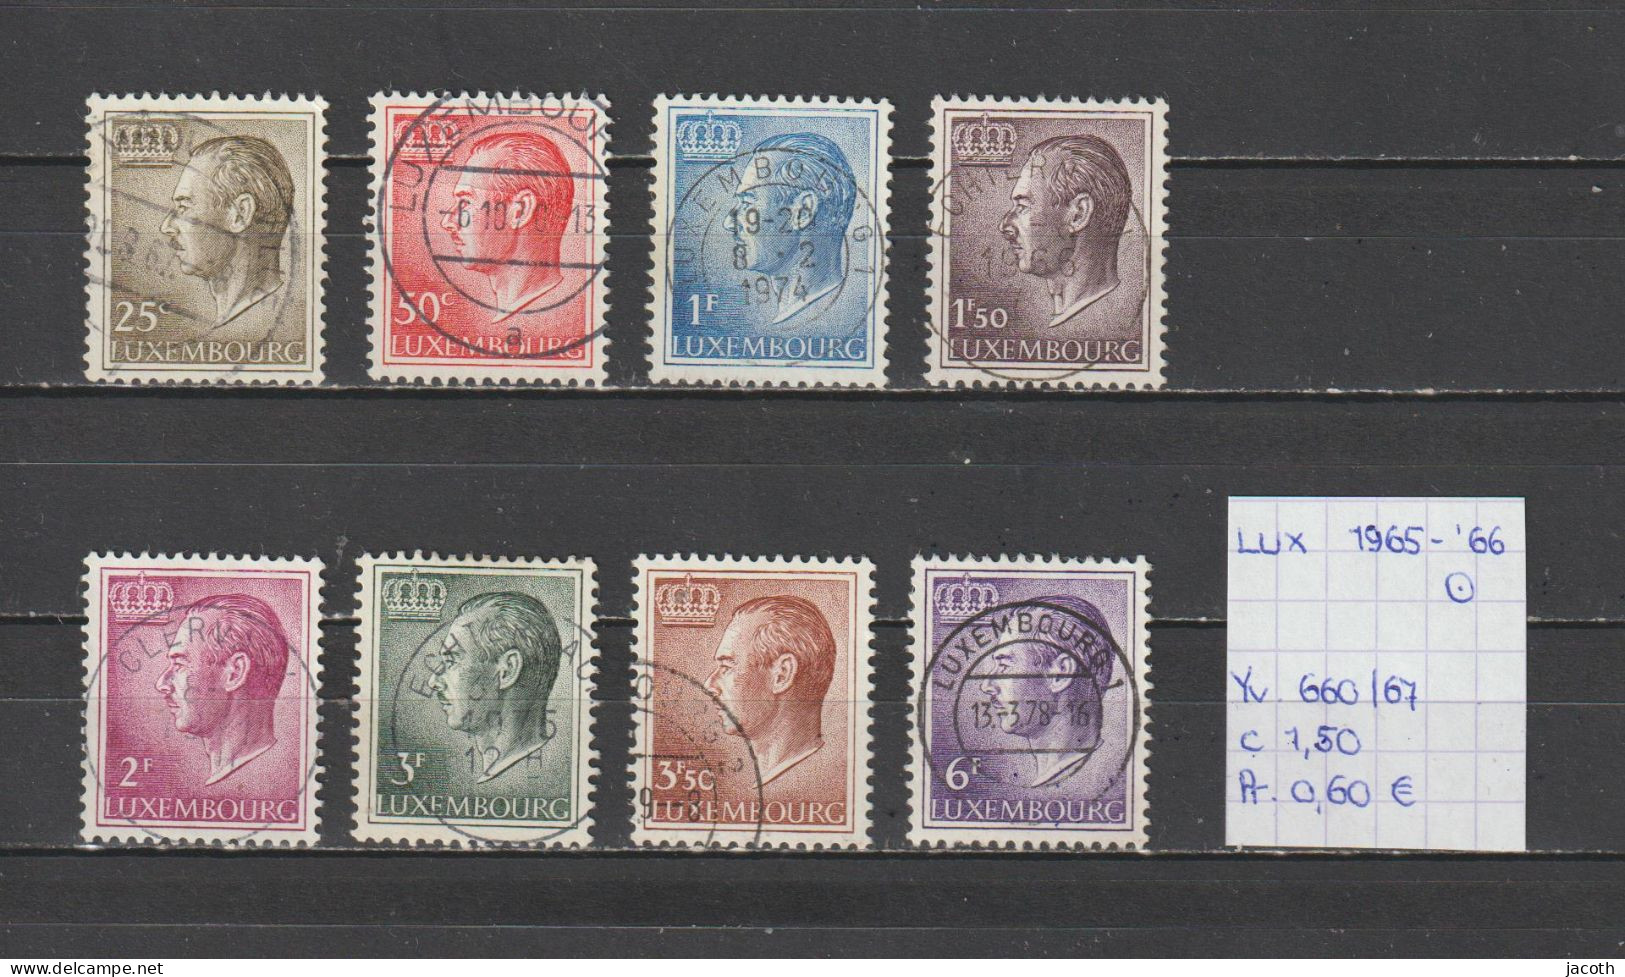 (TJ) Luxembourg 1965-'66 - YT 660/67 (gest./obl./used) - Gebraucht